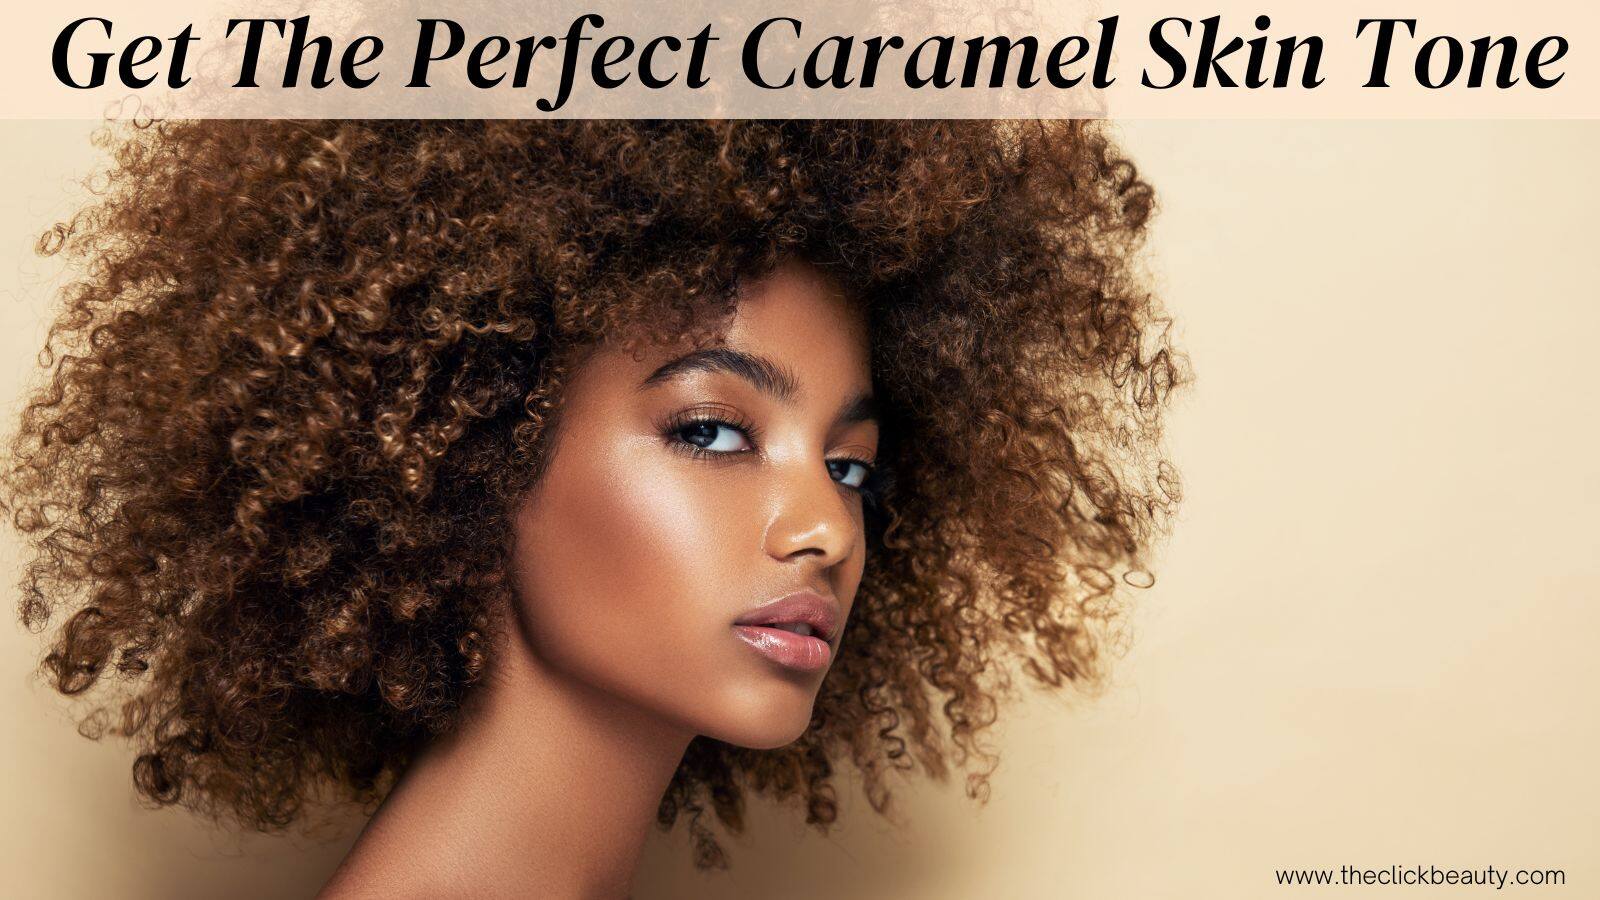 How To Get The Perfect Caramel Skin Tone - The Click Beauty